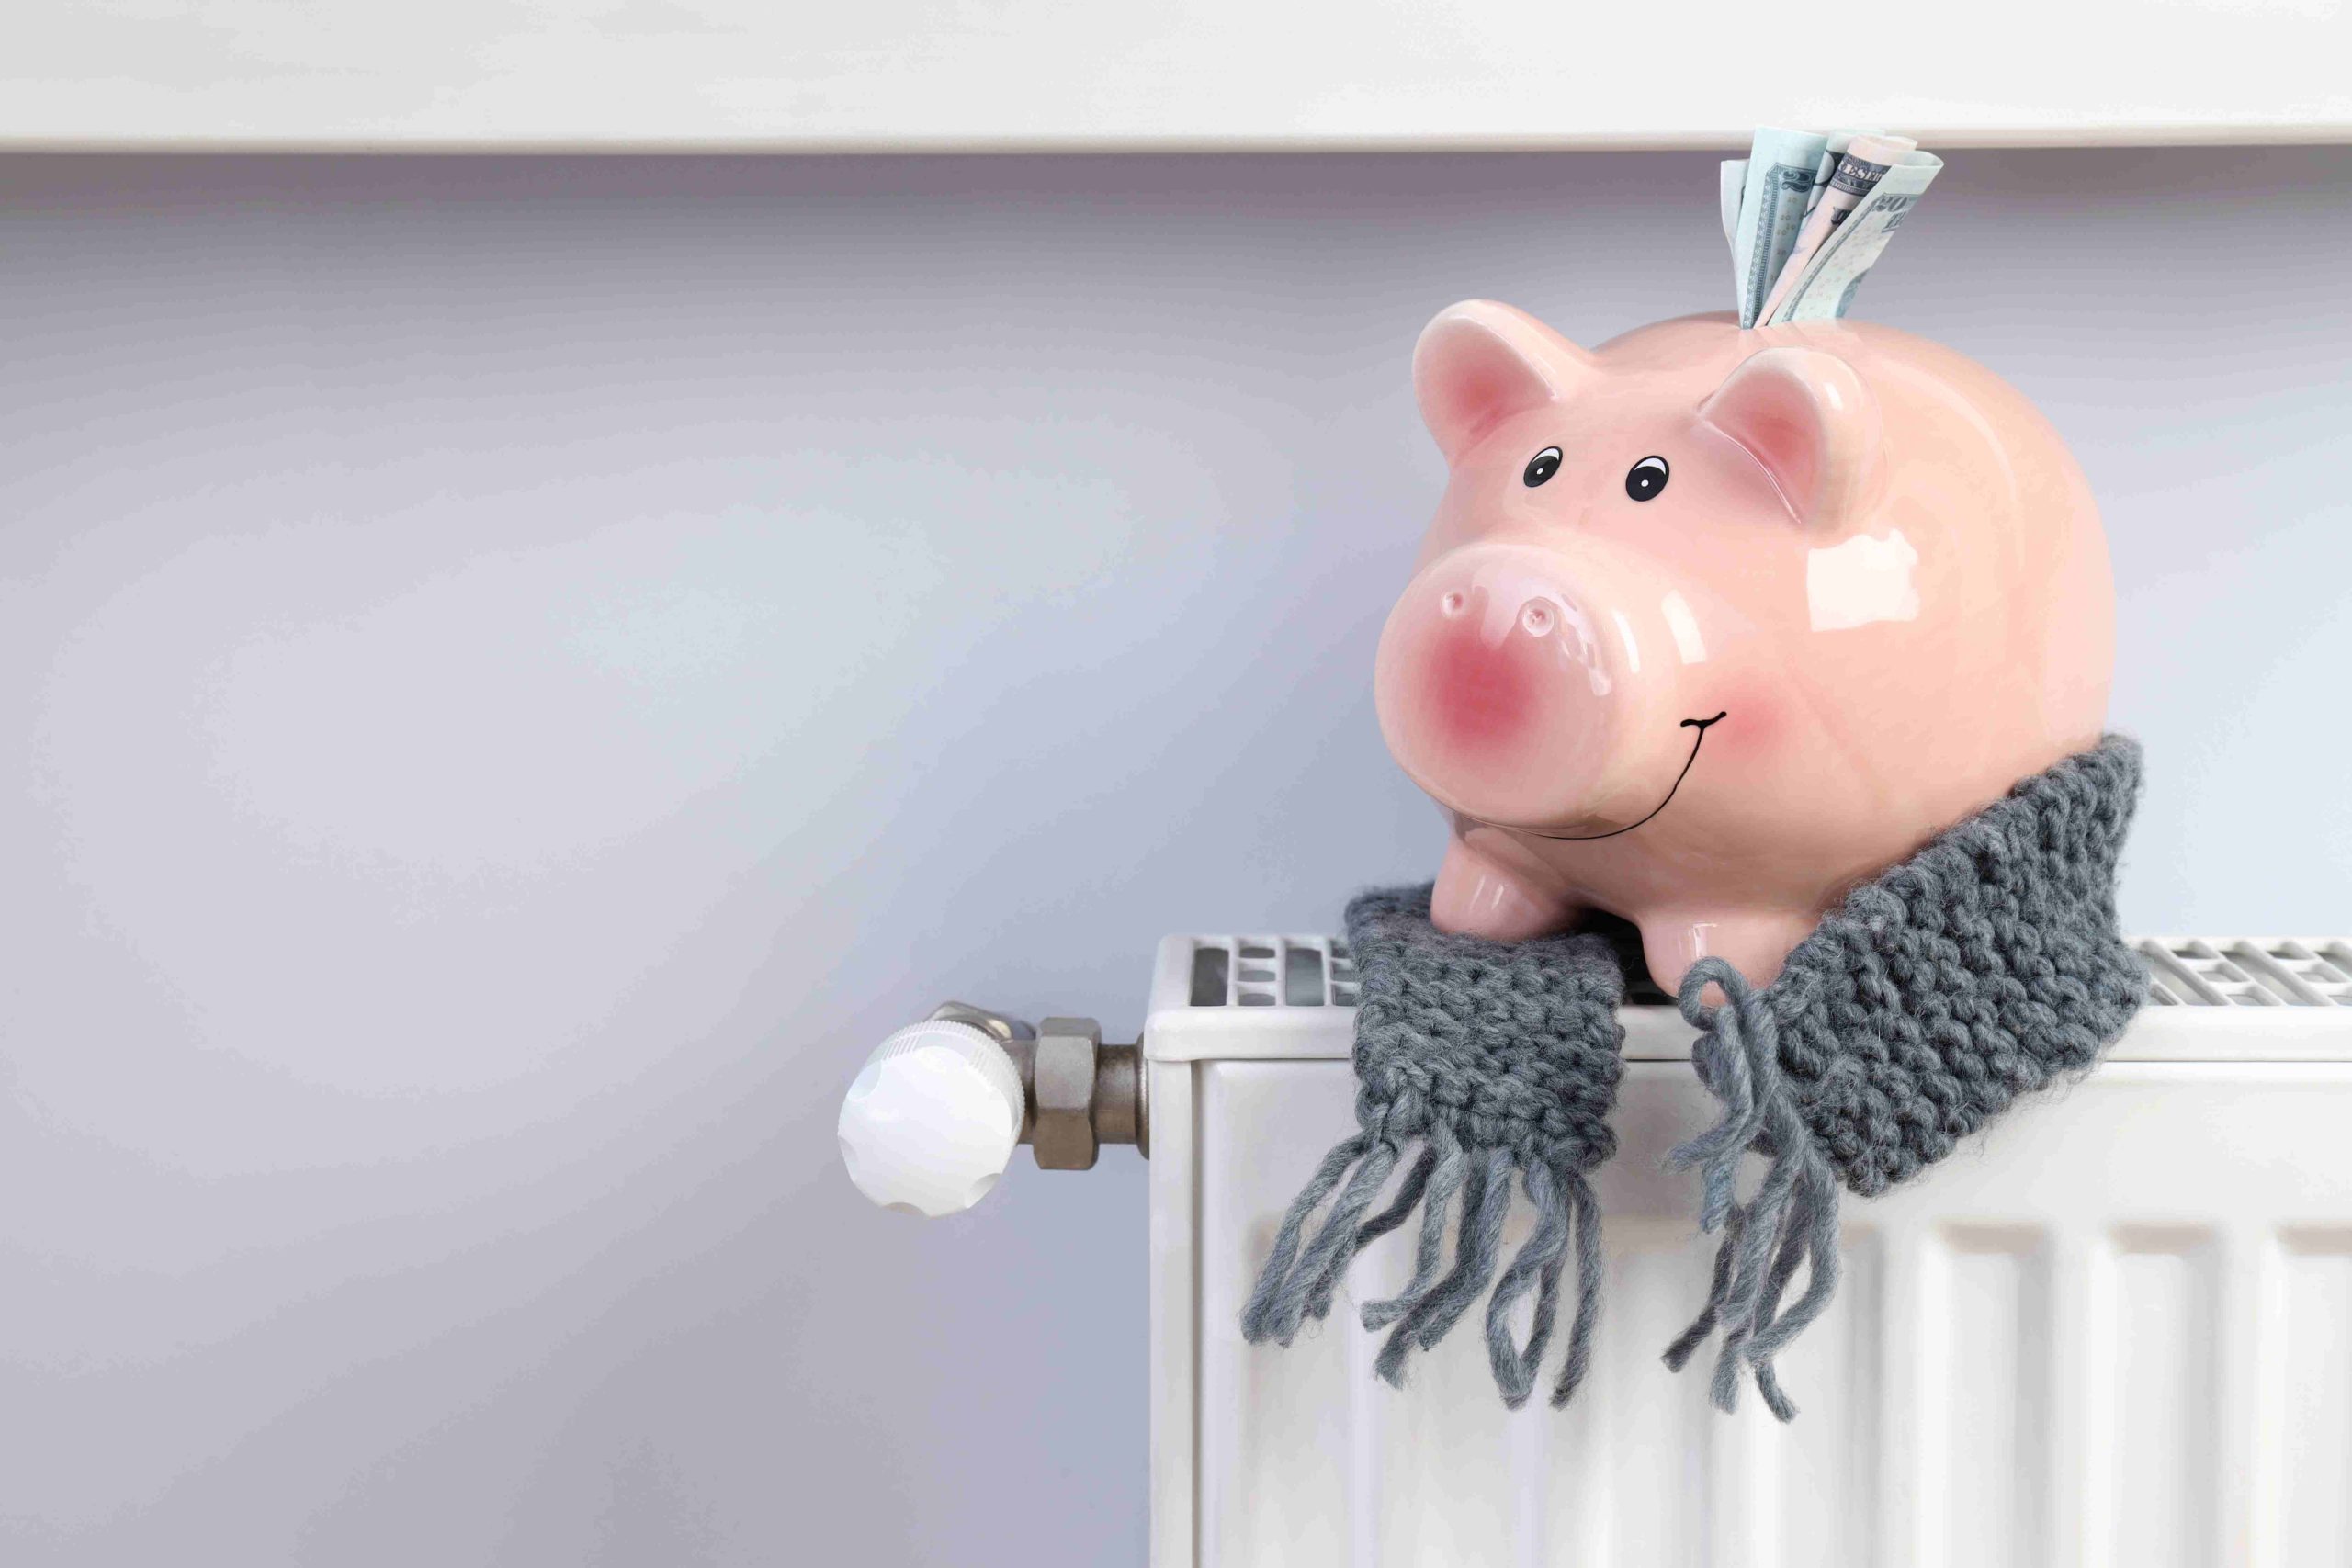 plumber cost amount in a piggy bank on a radiator